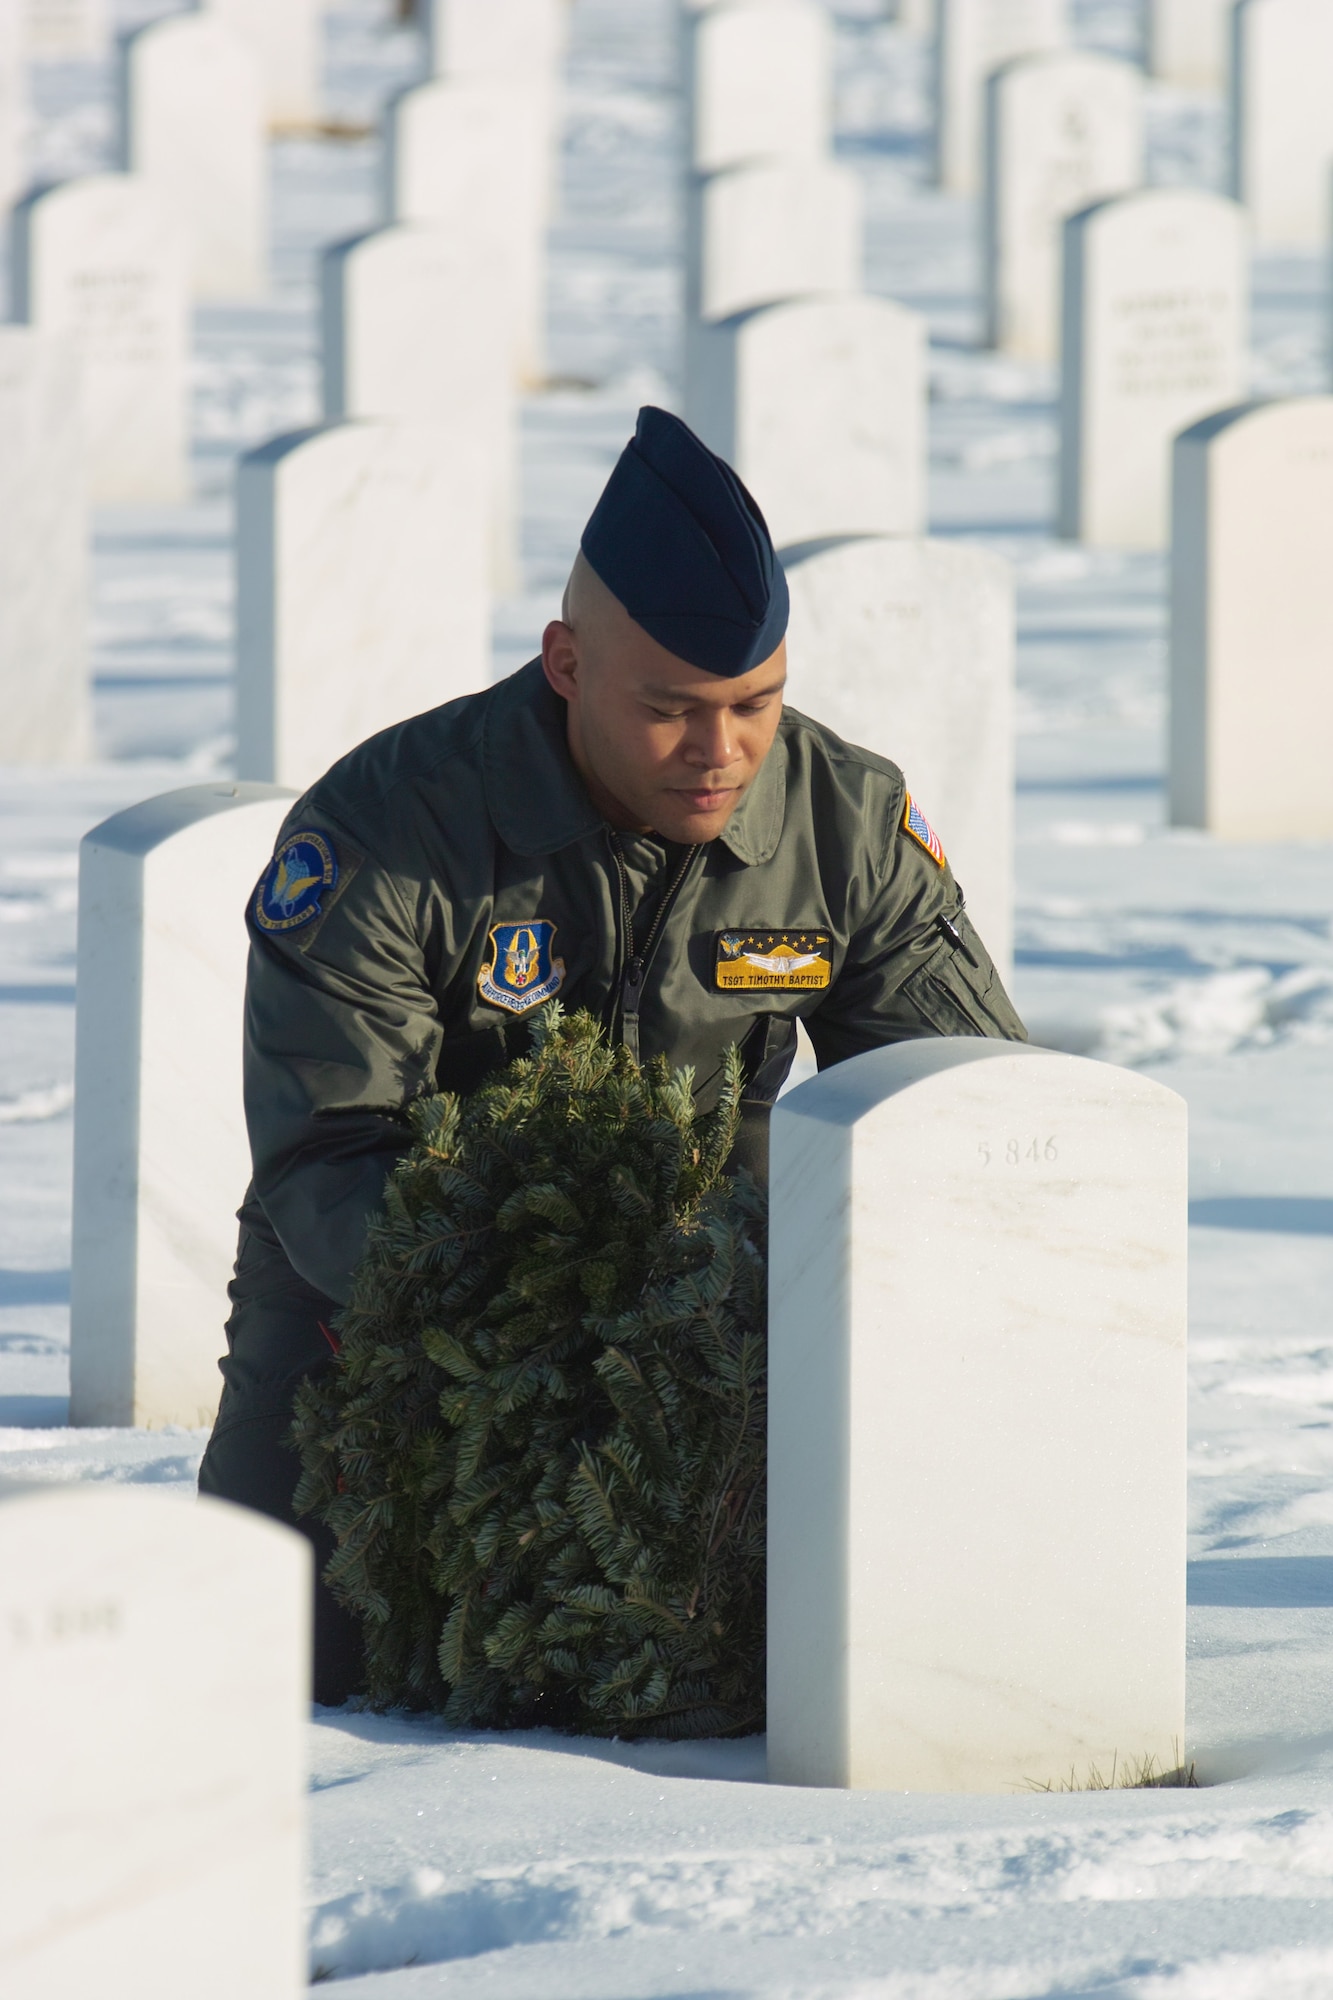 Tech. Sgt. Timothy Baptist from Schriever Air Force Base, Colo., lays a wreath on a veteran's grave during Wreaths Across America. Volunteers laid more than 400 wreaths during the Dec. 12 event. (U.S. Air Force photo by Master Sgt. Steven Clark)